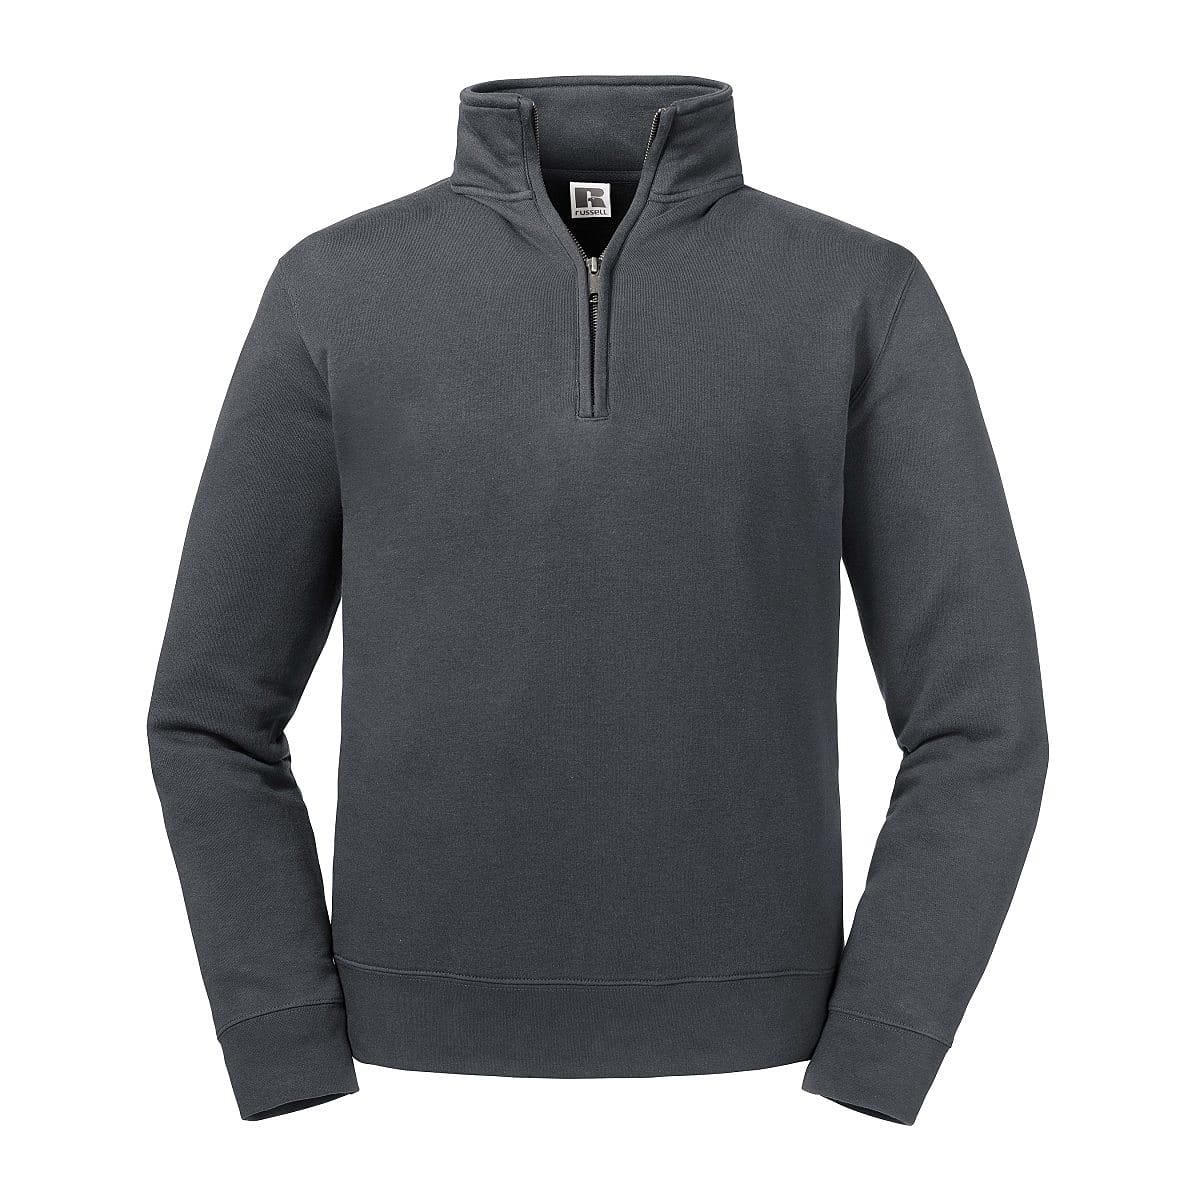 Russell Authentic 1/4 Zip Sweater in Convoy Grey (Product Code: R270M)